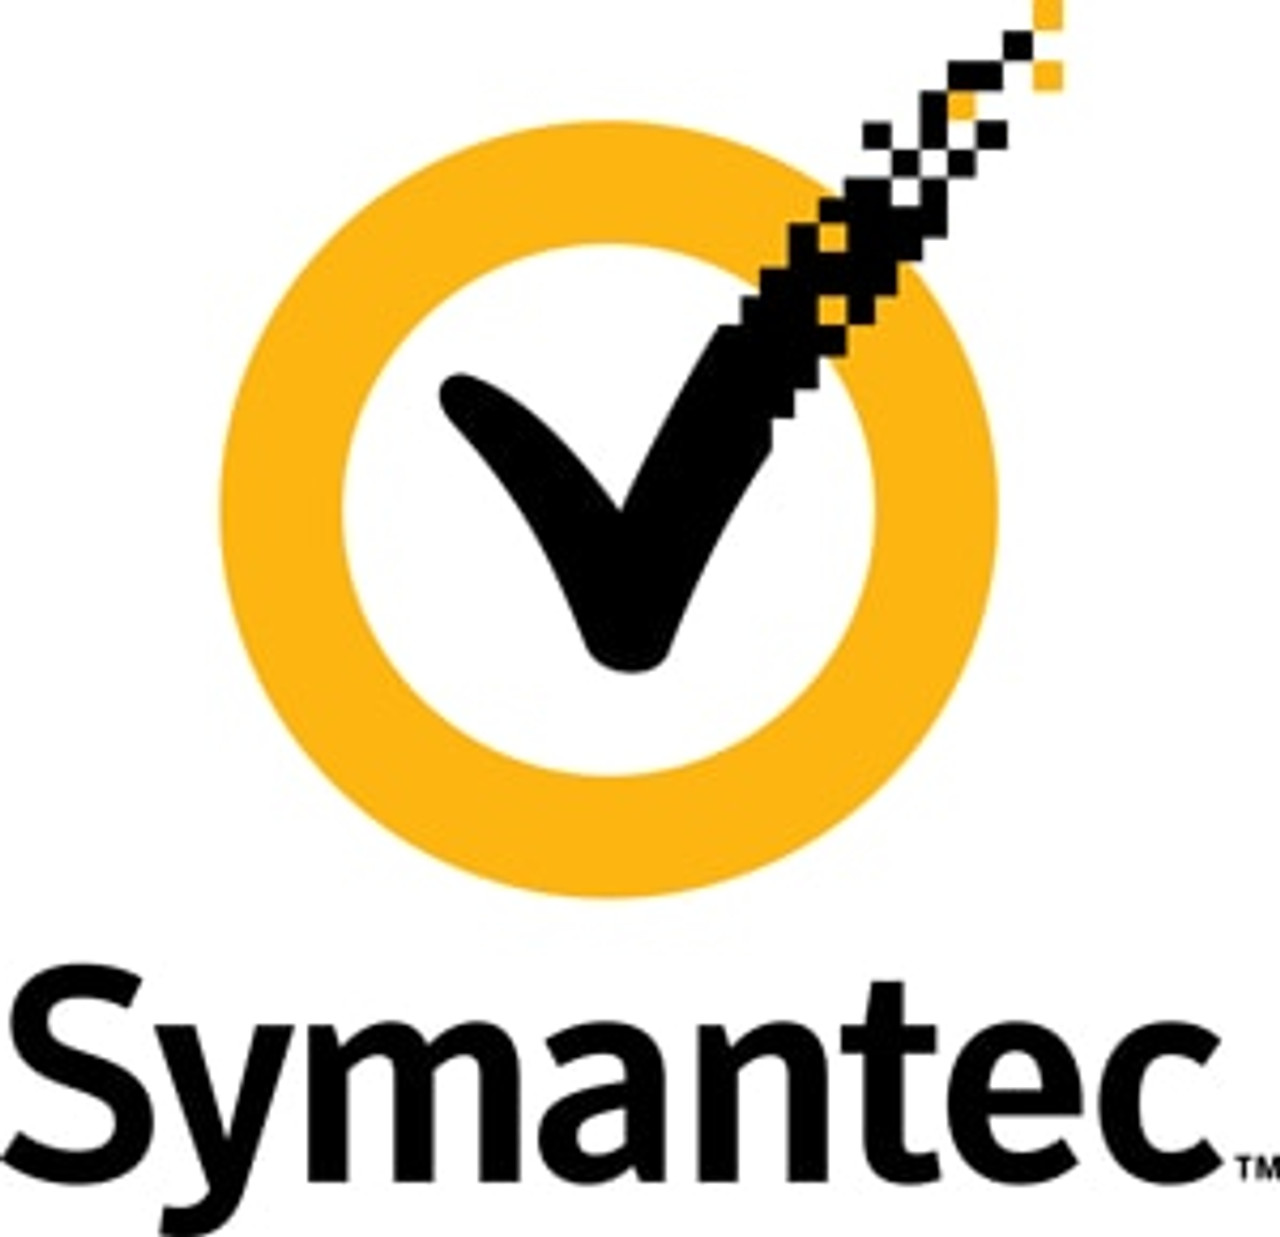 Symantec Endpoint Protection with Endpoint Detection and Response, Additional Quantity Subscription License with Support, 1-24 Devices 1 YR